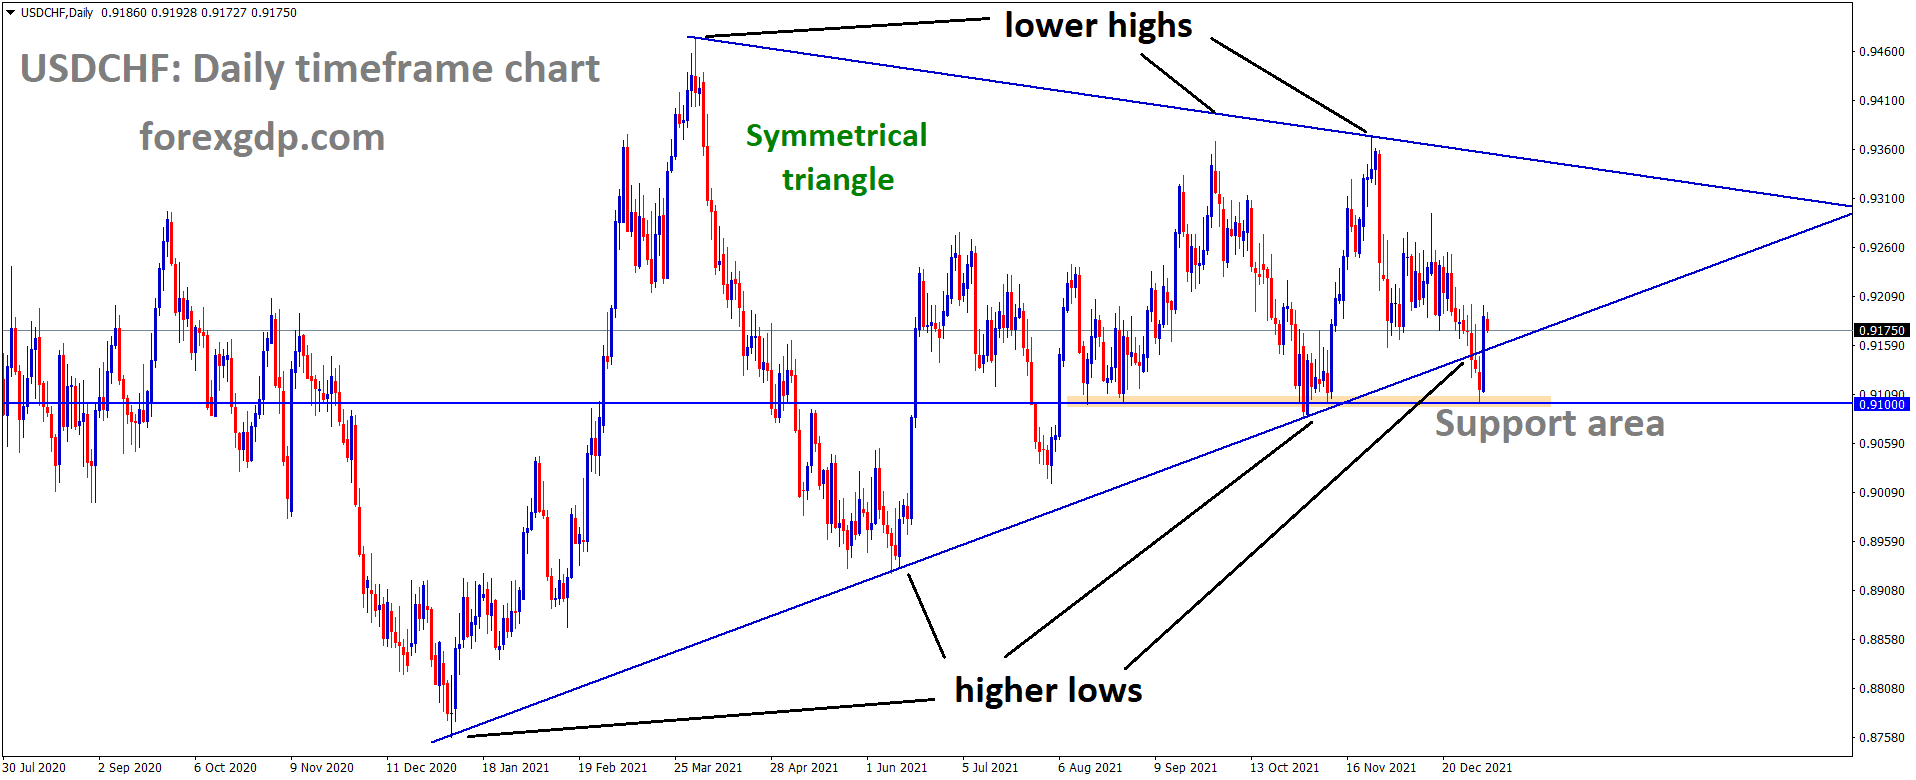 USDCHF is moving in the Symmetrical triangle pattern and the market has rebounded from the horizontal support area of the pattern